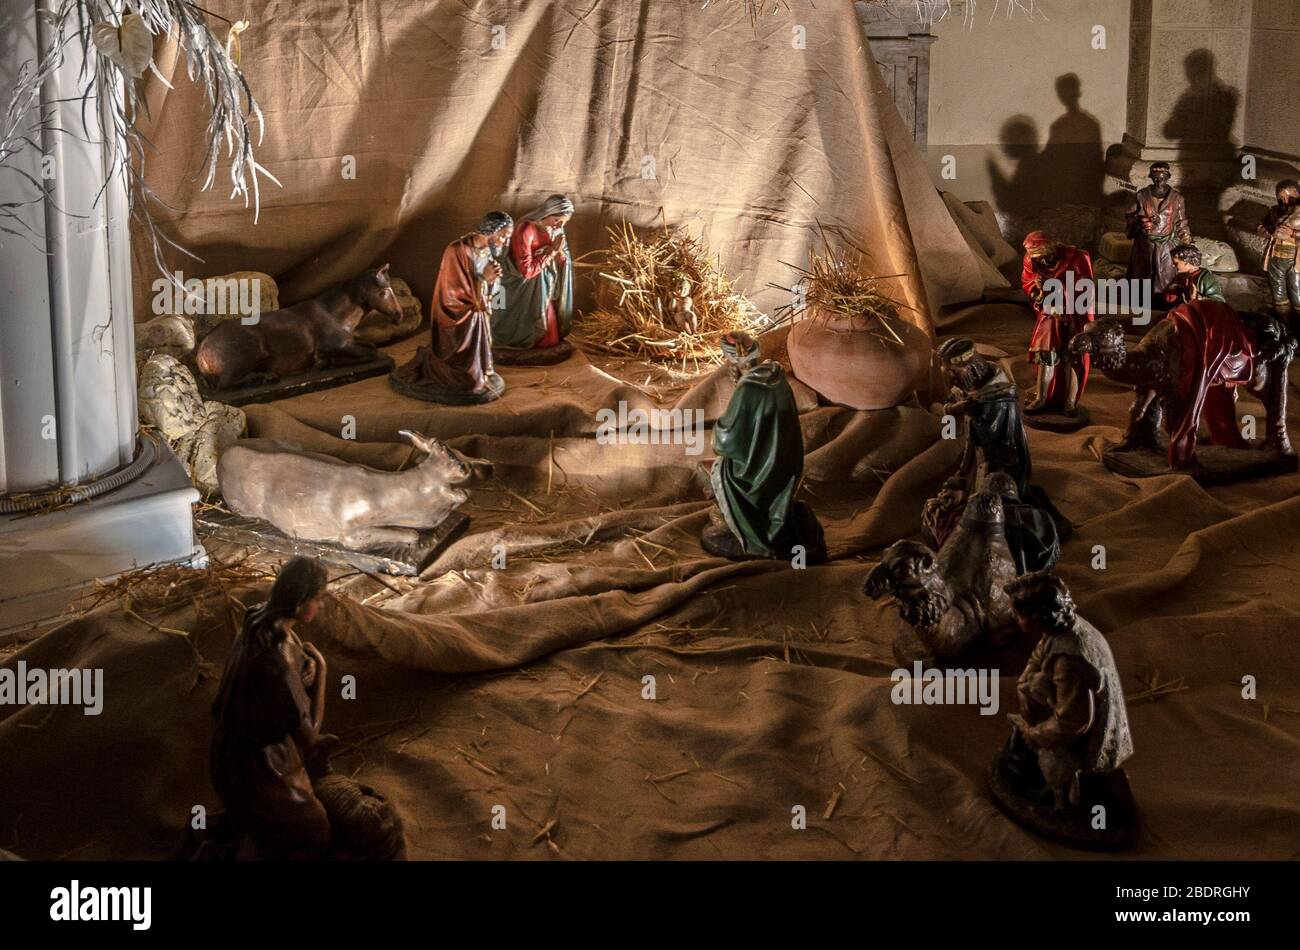 Representation of the traditional Christmas nativity scene with wooden statues Stock Photo